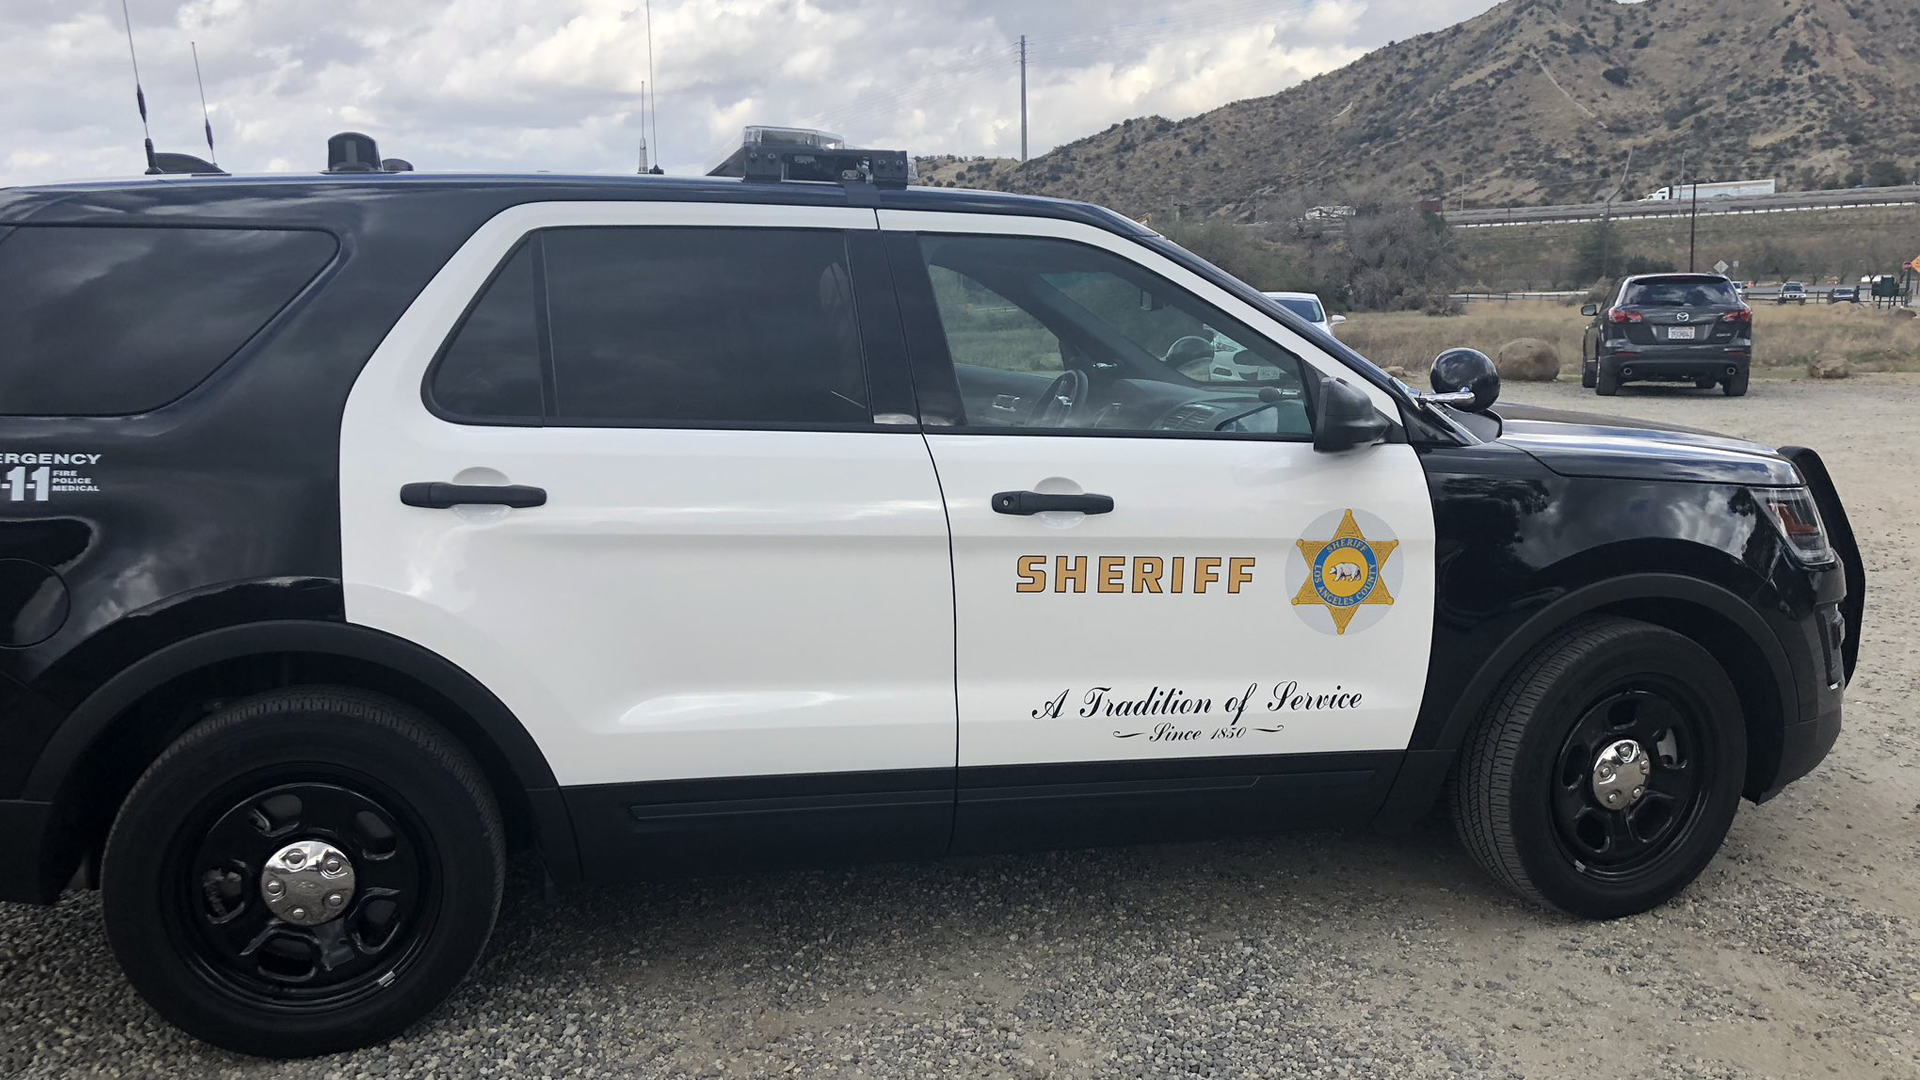 Santa Clarita Sheriffs Department Reminds Residents “Pull The Fuck Over”